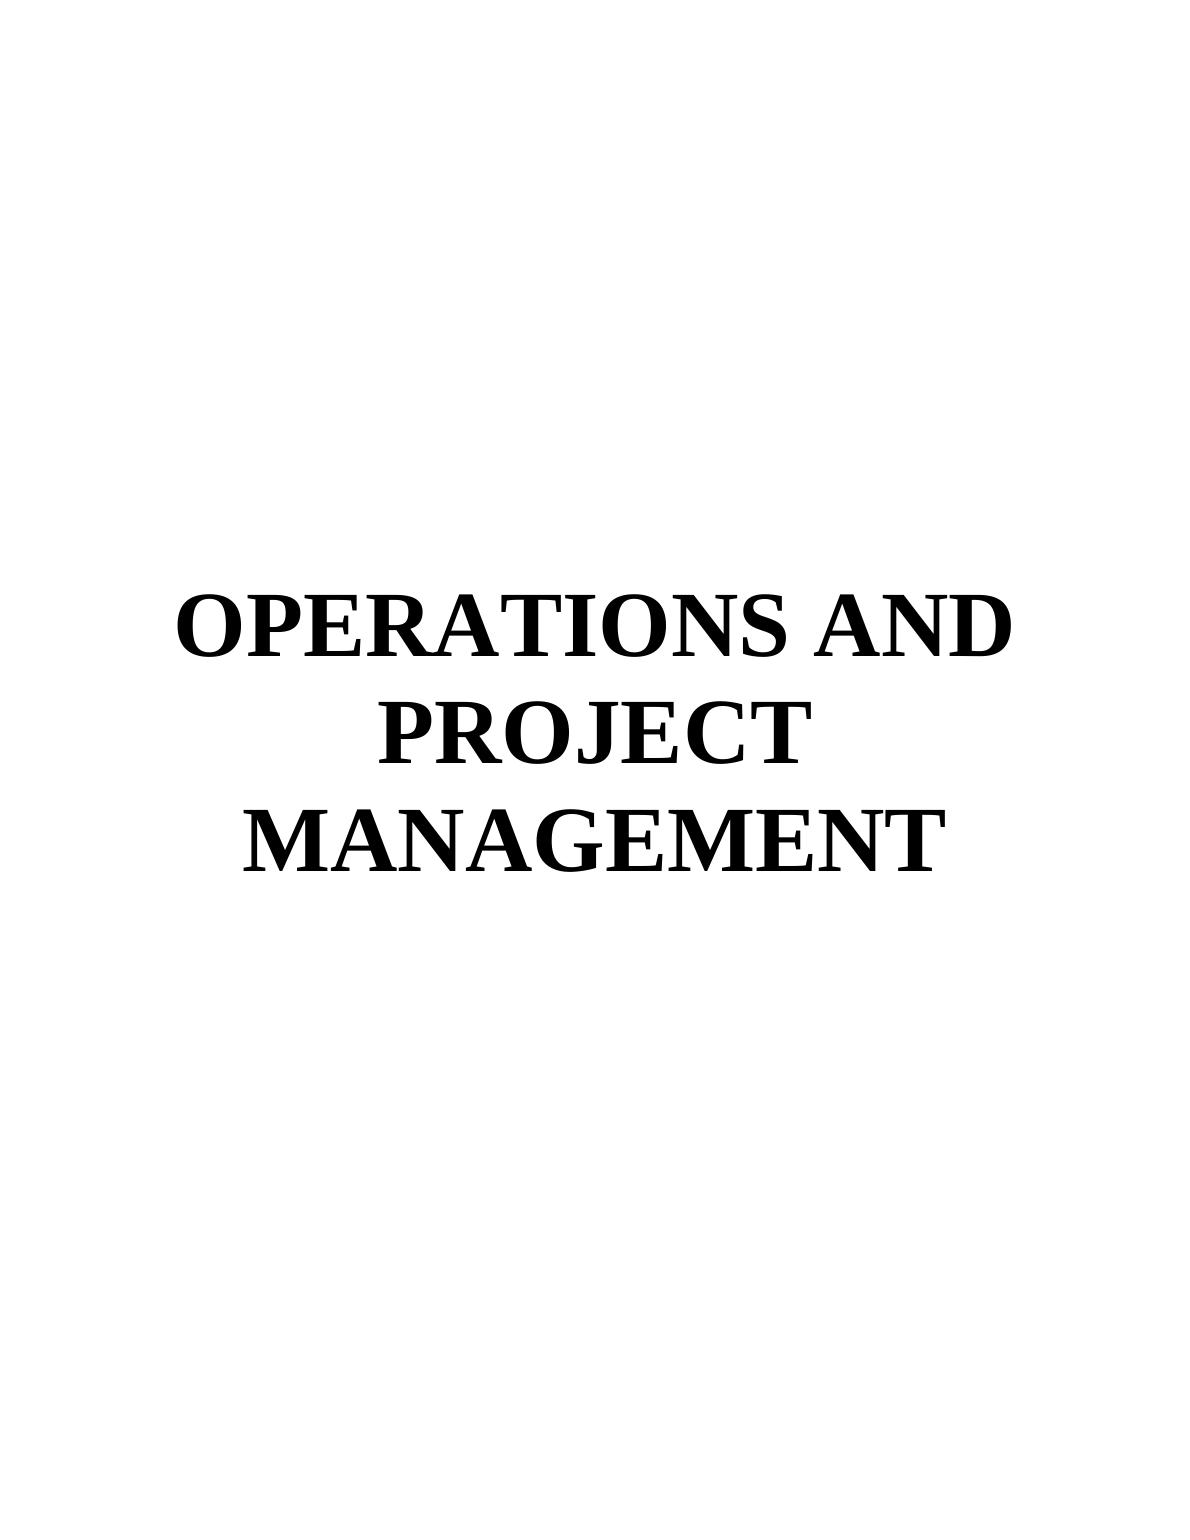 Operations and Project Management Assignment Solution - Doc_1